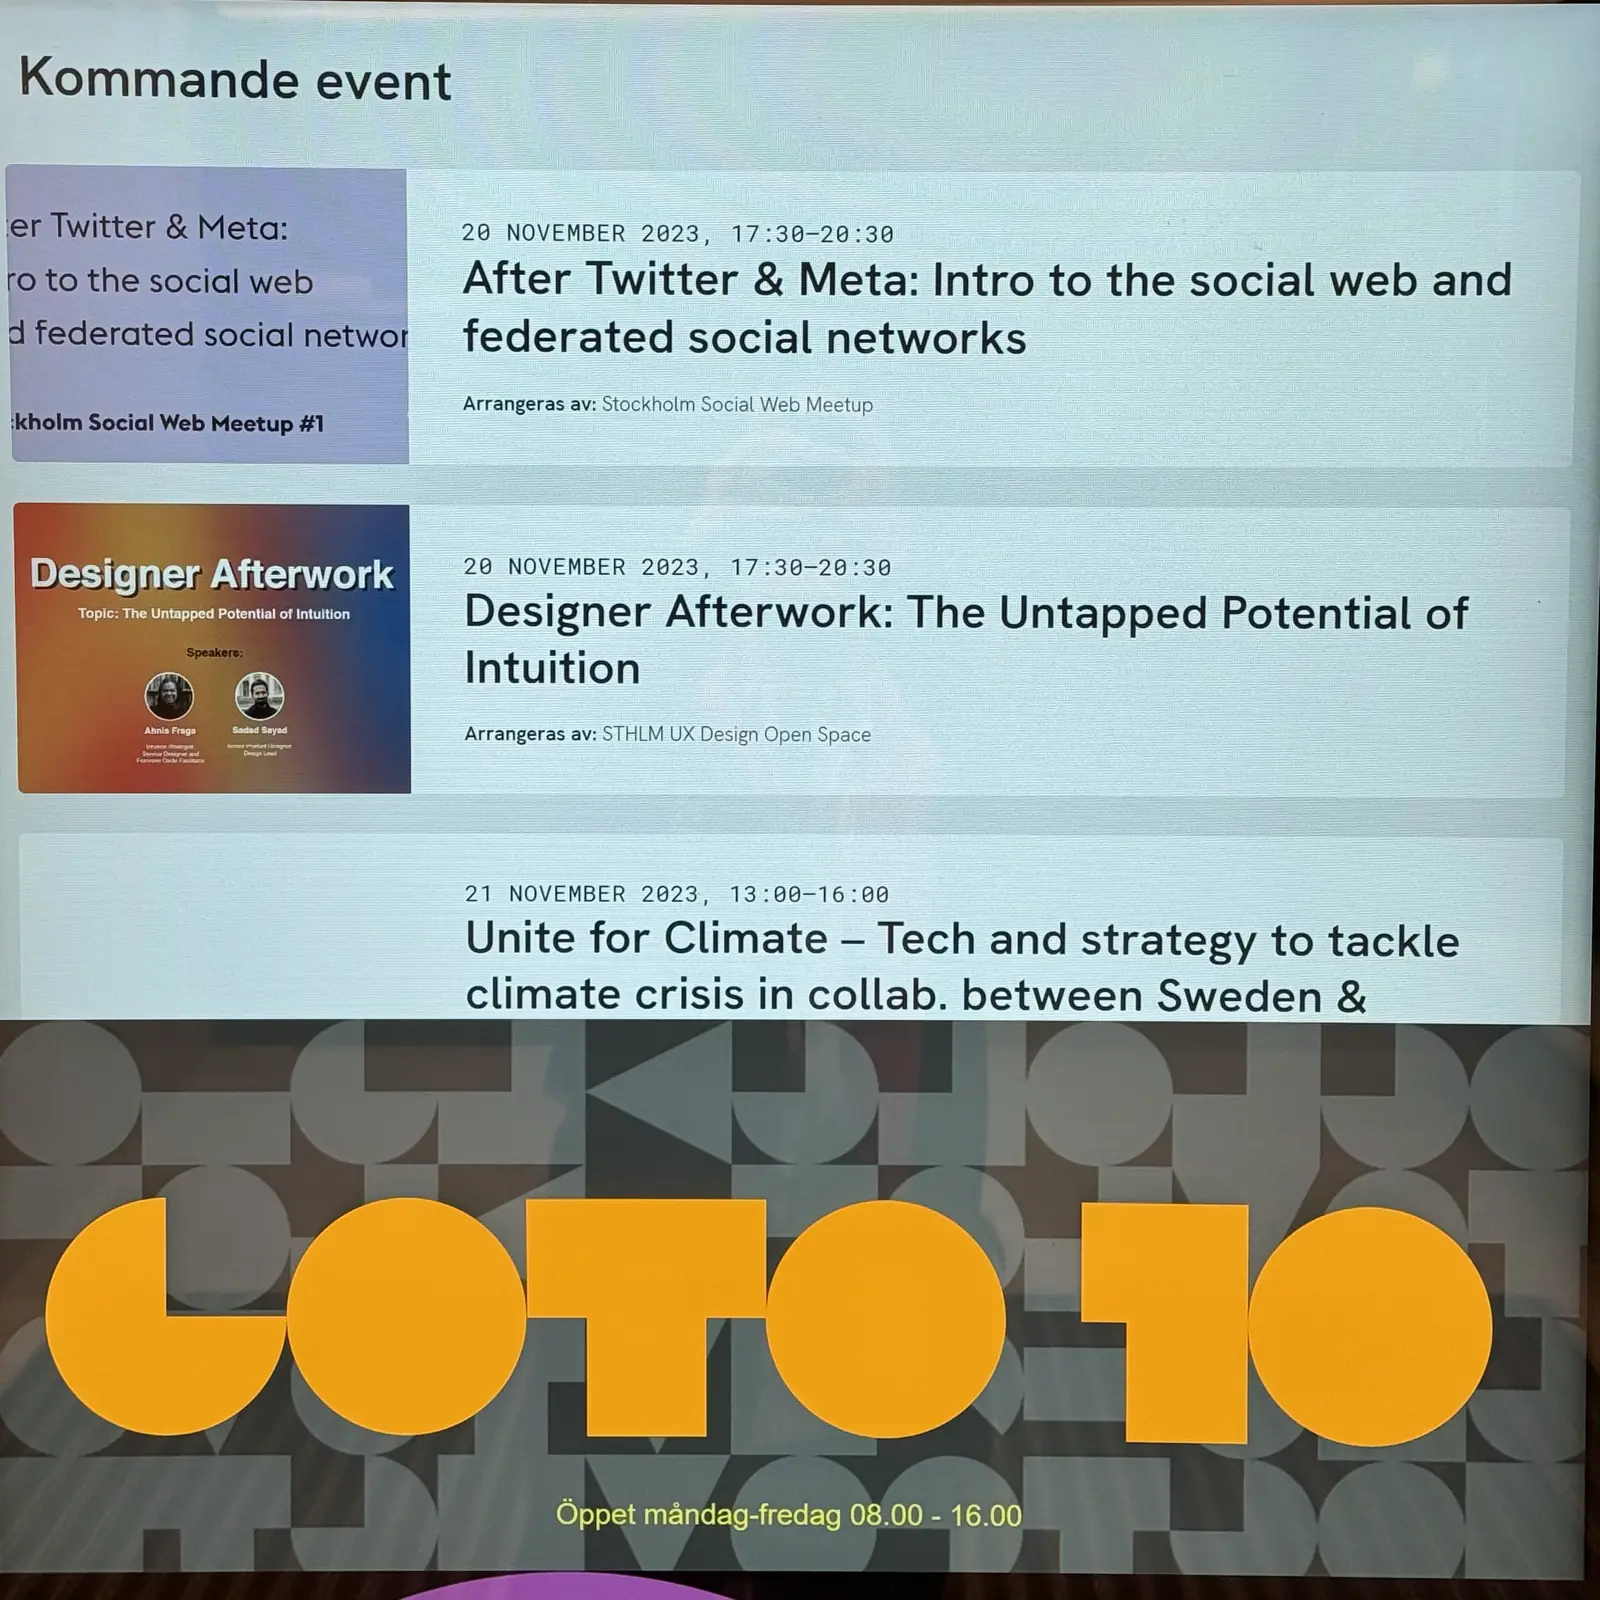 Goto 10 sign with Stockholm Social Web Meetup listed